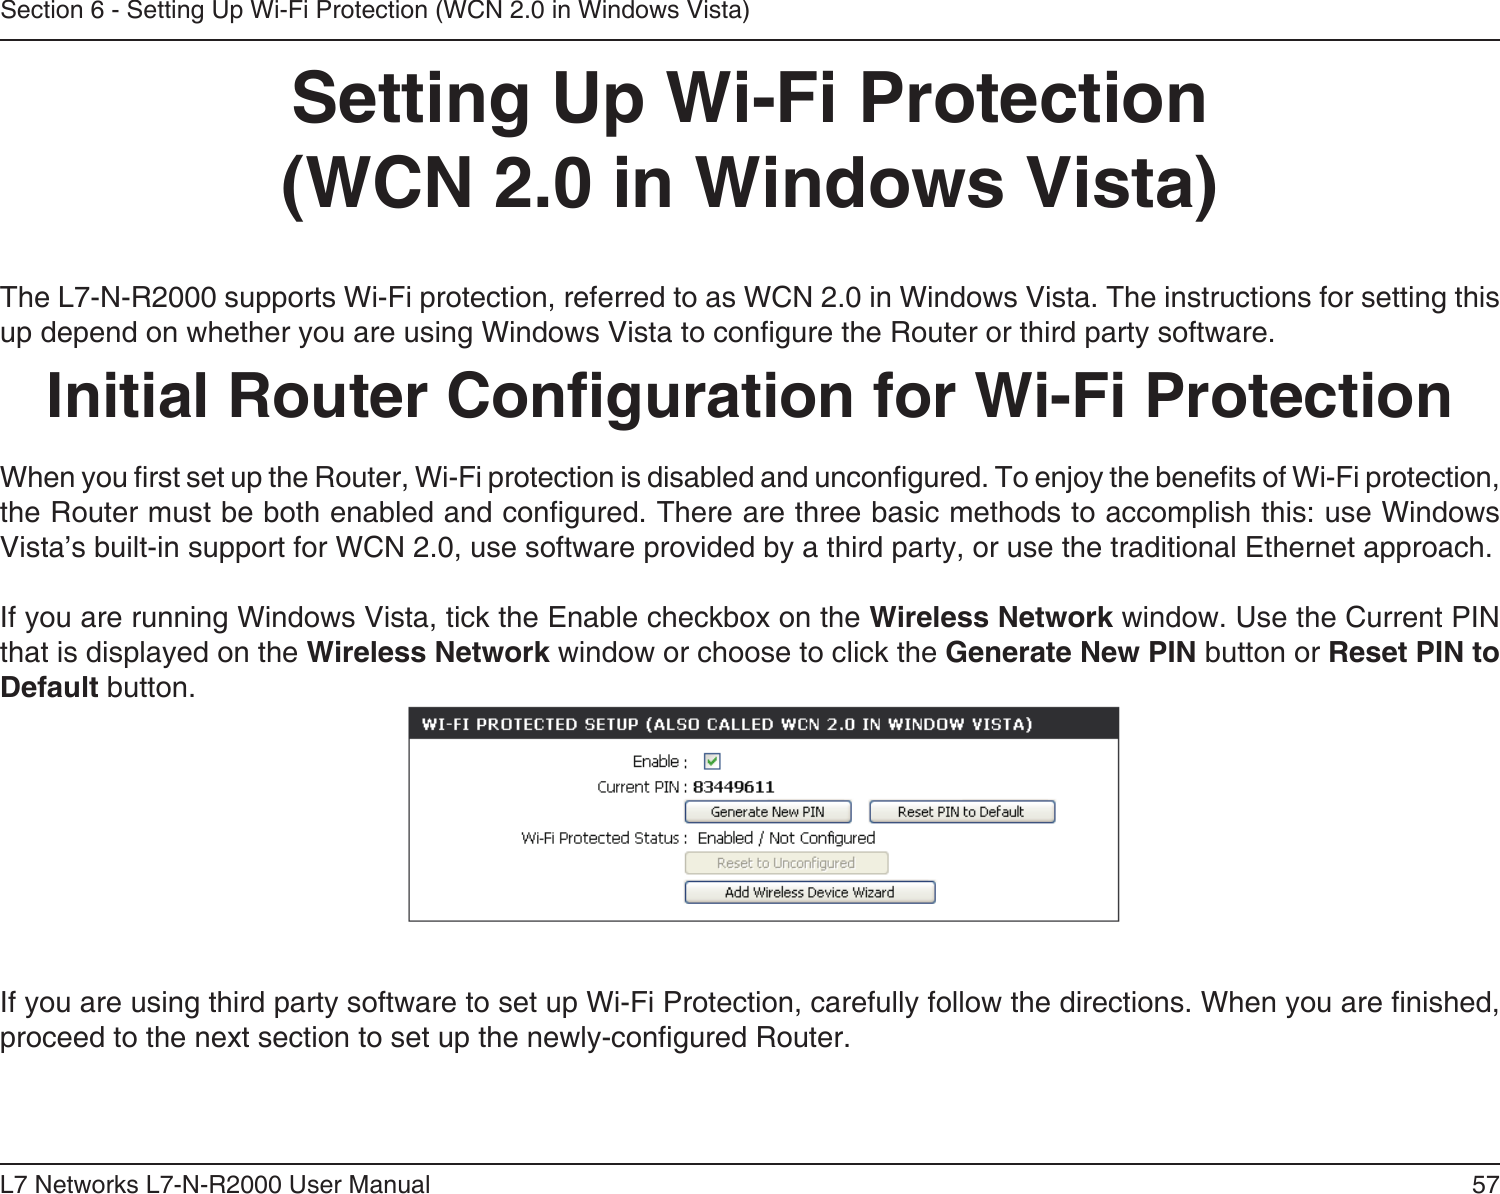 57L7 Networks L7-N-R2000 User ManualSection 6 - Setting Up Wi-Fi Protection (WCN 2.0 in Windows Vista)Setting Up Wi-Fi Protection(WCN 2.0 in Windows Vista)The L7-N-R2000 supports Wi-Fi protection, referred to as WCN 2.0 in Windows Vista. The instructions for setting this up depend on whether you are using Windows Vista to congure the Router or third party software.        Initial Router Conguration for Wi-Fi ProtectionWhen you rst set up the Router, Wi-Fi protection is disabled and uncongured. To enjoy the benets of Wi-Fi protection, the Router must be both enabled and congured. There are three basic methods to accomplish this: use Windows Vista’s built-in support for WCN 2.0, use software provided by a third party, or use the traditional Ethernet approach. If you are running Windows Vista, tick the Enable checkbox on the Wireless Network window. Use the Current PIN that is displayed on the Wireless Network window or choose to click the Generate New PIN button or Reset PIN to Default button. If you are using third party software to set up Wi-Fi Protection, carefully follow the directions. When you are nished, proceed to the next section to set up the newly-congured Router. 